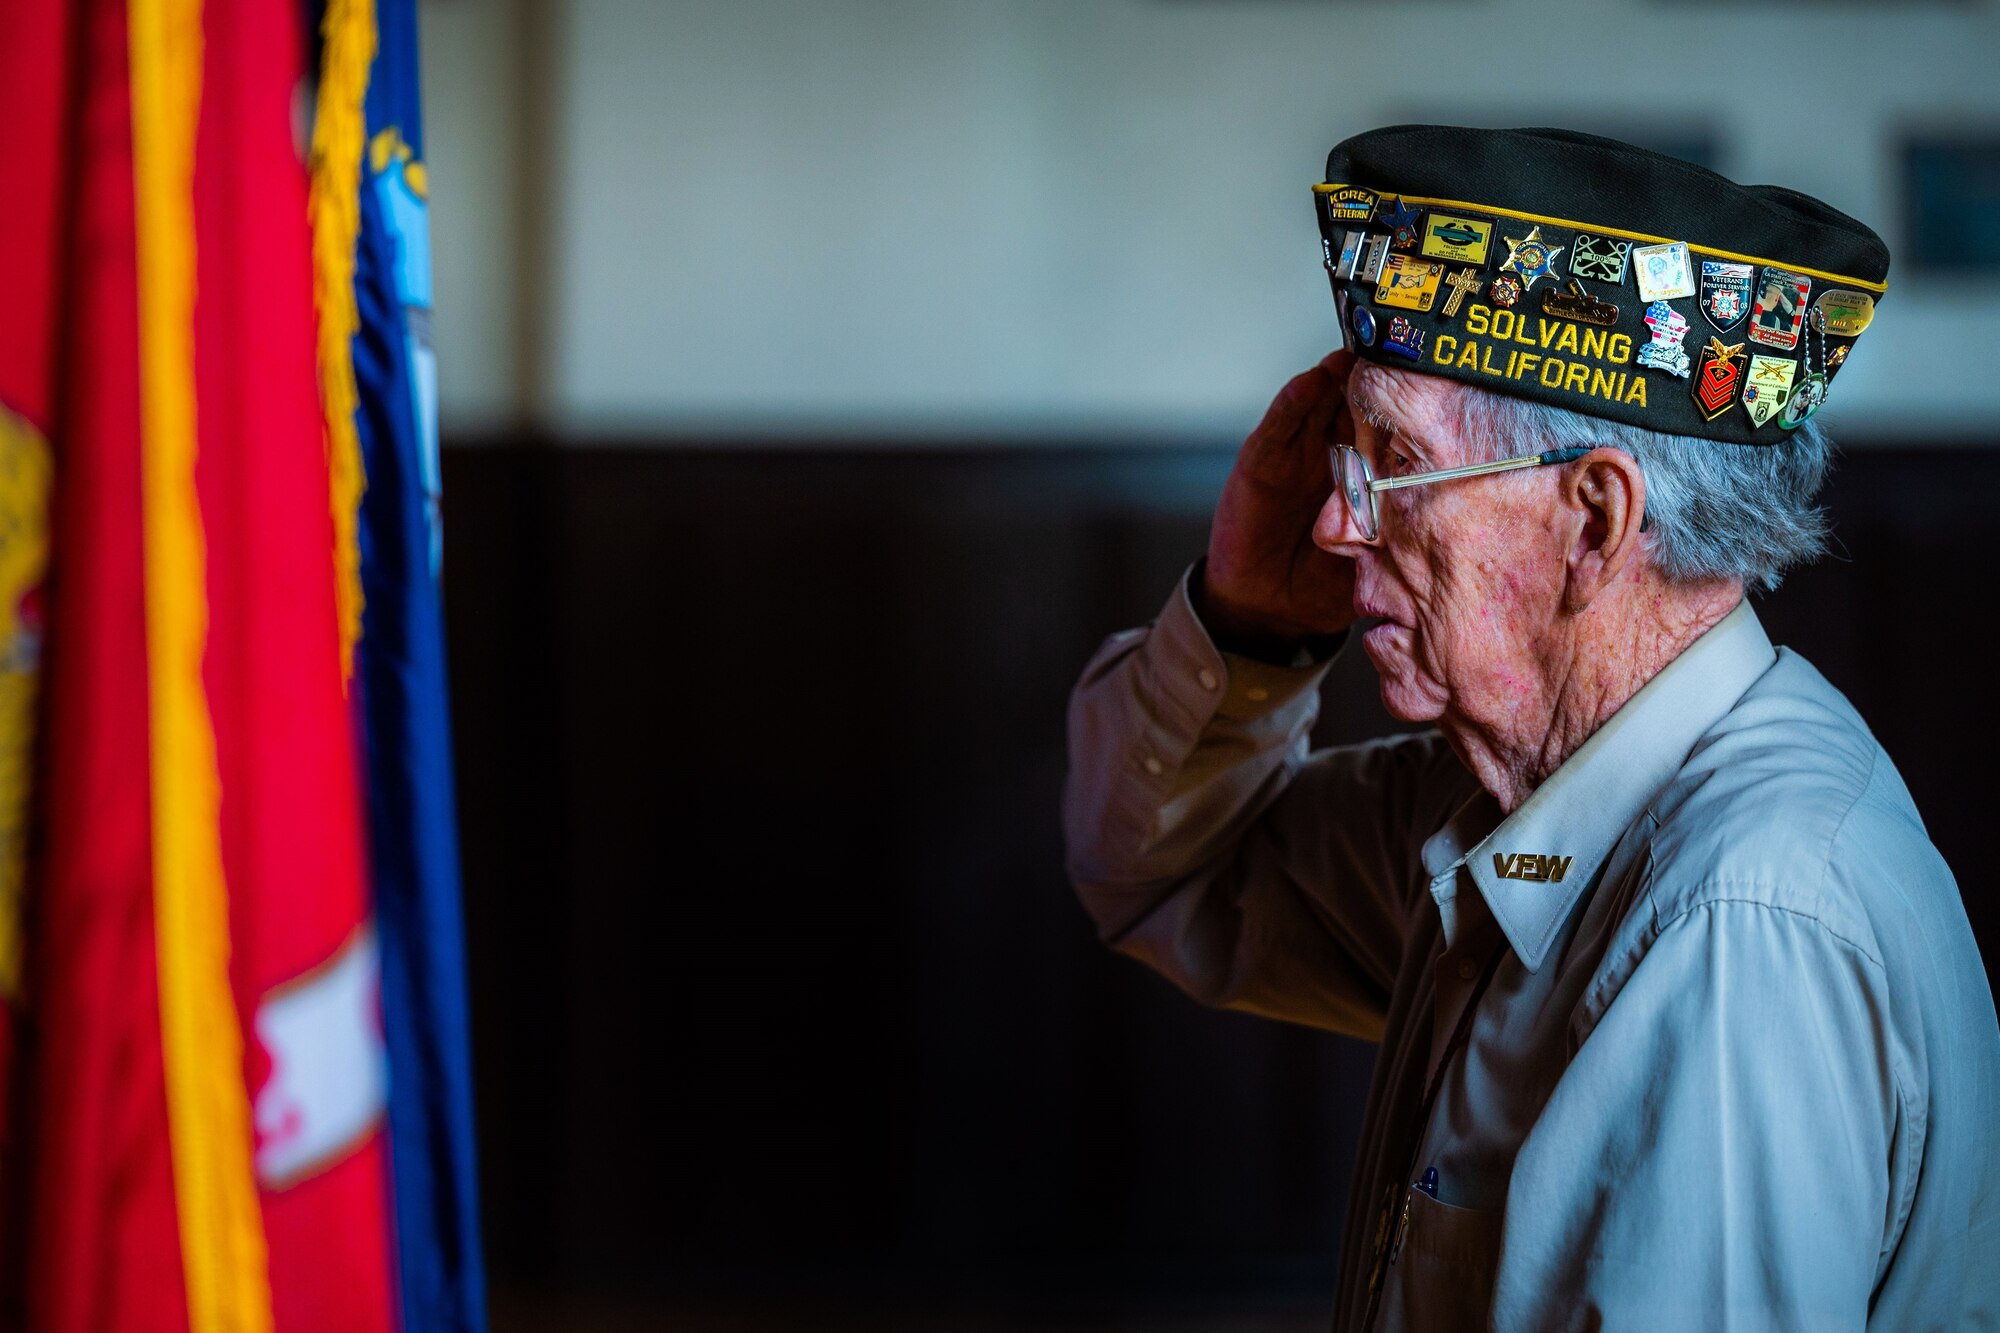 A Veteran from Solvang salutes the POW/MIA flag during a Memorial Day ceremony at the Solvang Veterans Memorial Hall in Solvang, Calif., May 29, 2023. U.S. Space Force Maj. Gen. Douglas A. Schiess, Combined Force Space Component Command commander, gave the keynote speech to over 200 attendees that included veterans from the Global War on Terrorism, Vietnam, Korea and even one veteran from WWII. The ceremony also included the raising on the American Flag by a local Cub Scouts group and a laying of a wreath with a Gold Star family member. (U.S. Space Force photo by Tech. Sgt. Luke Kitterman)